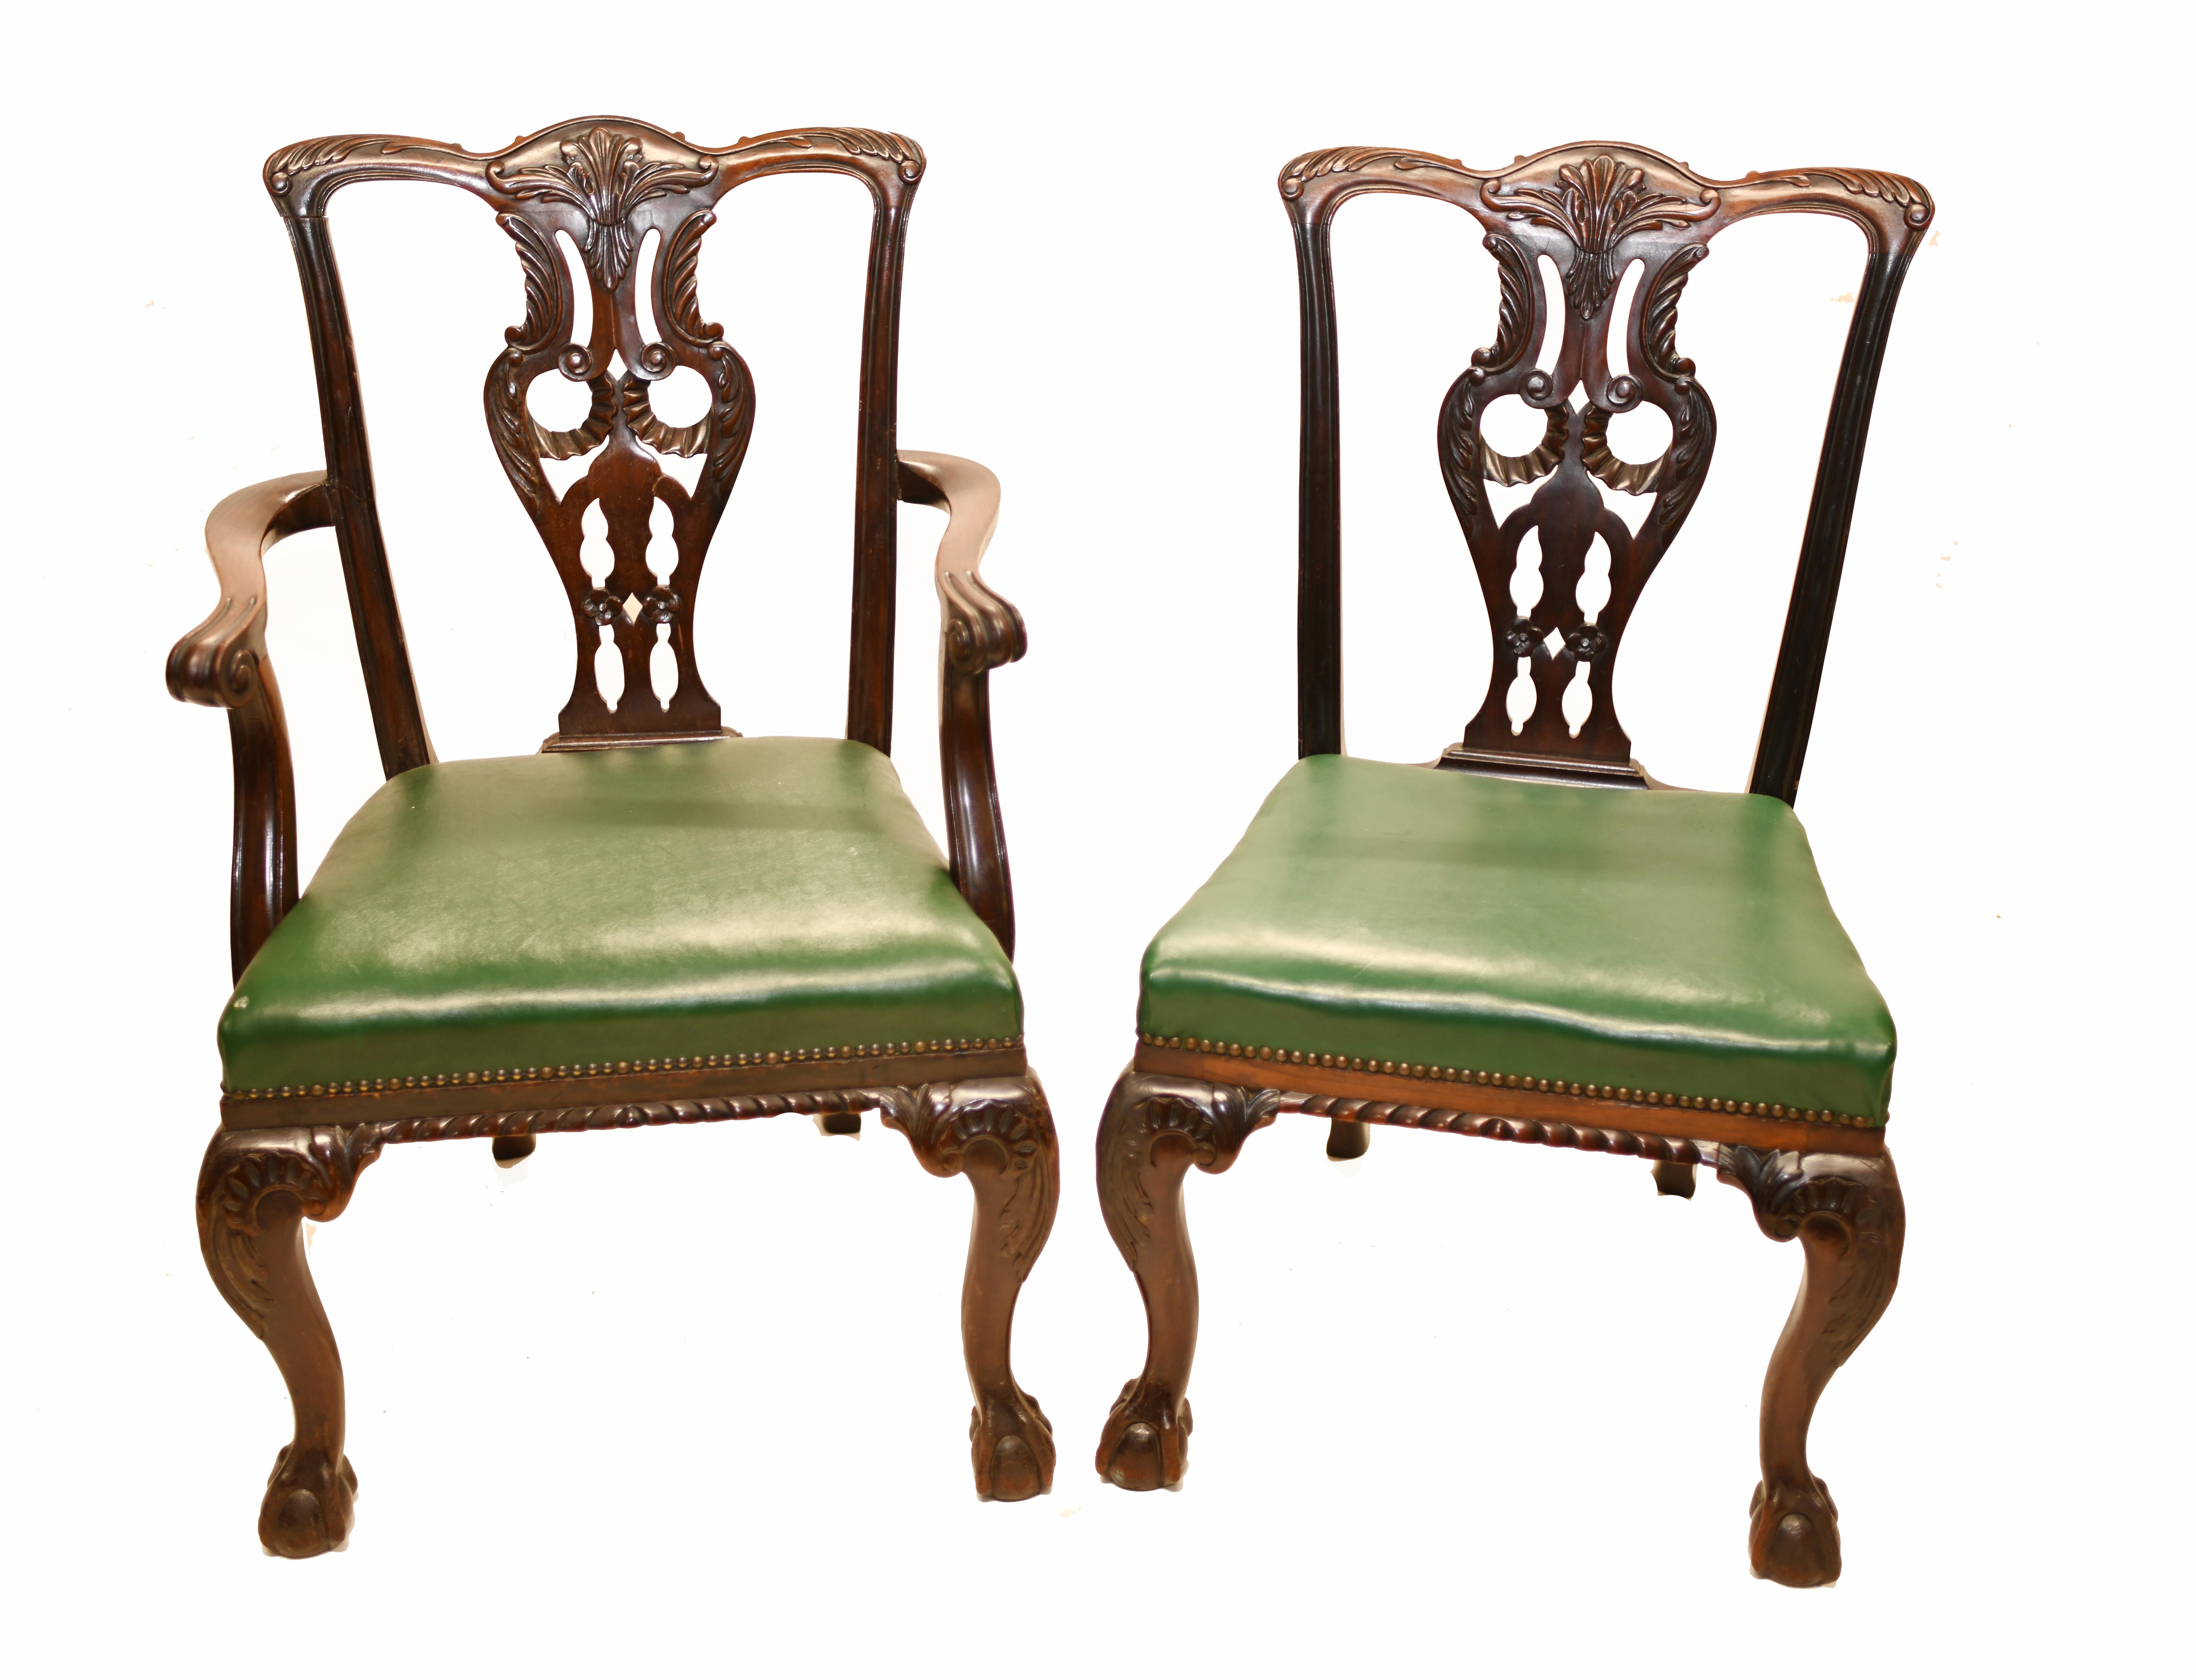 A superb quality set of ten Chippendale chairs in mahogany with leather seats. 
The chairs are stamped by Shoolbred & Co.
James Shoolbred was established in the 1820 at Tottenham Court Road, London. 
Shoolbred was granted a Royal Warrant by the